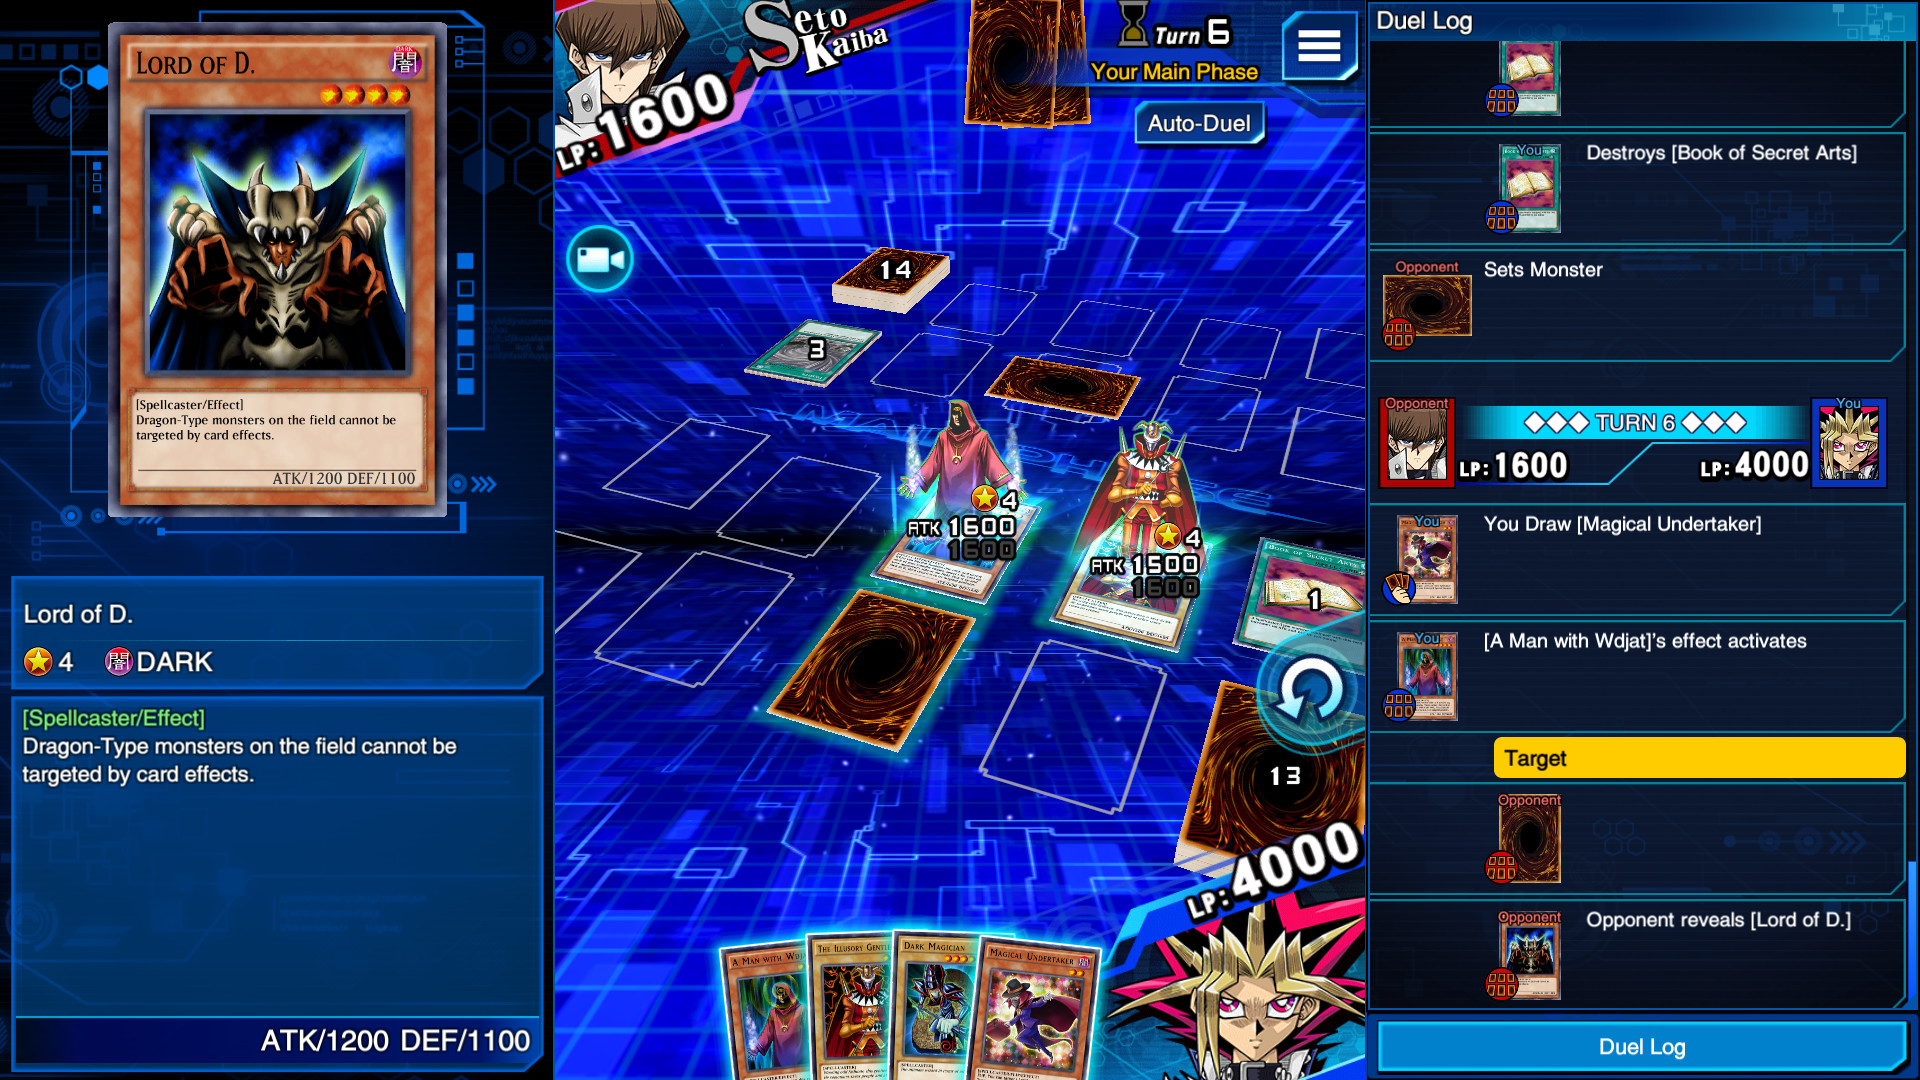 duel links pc